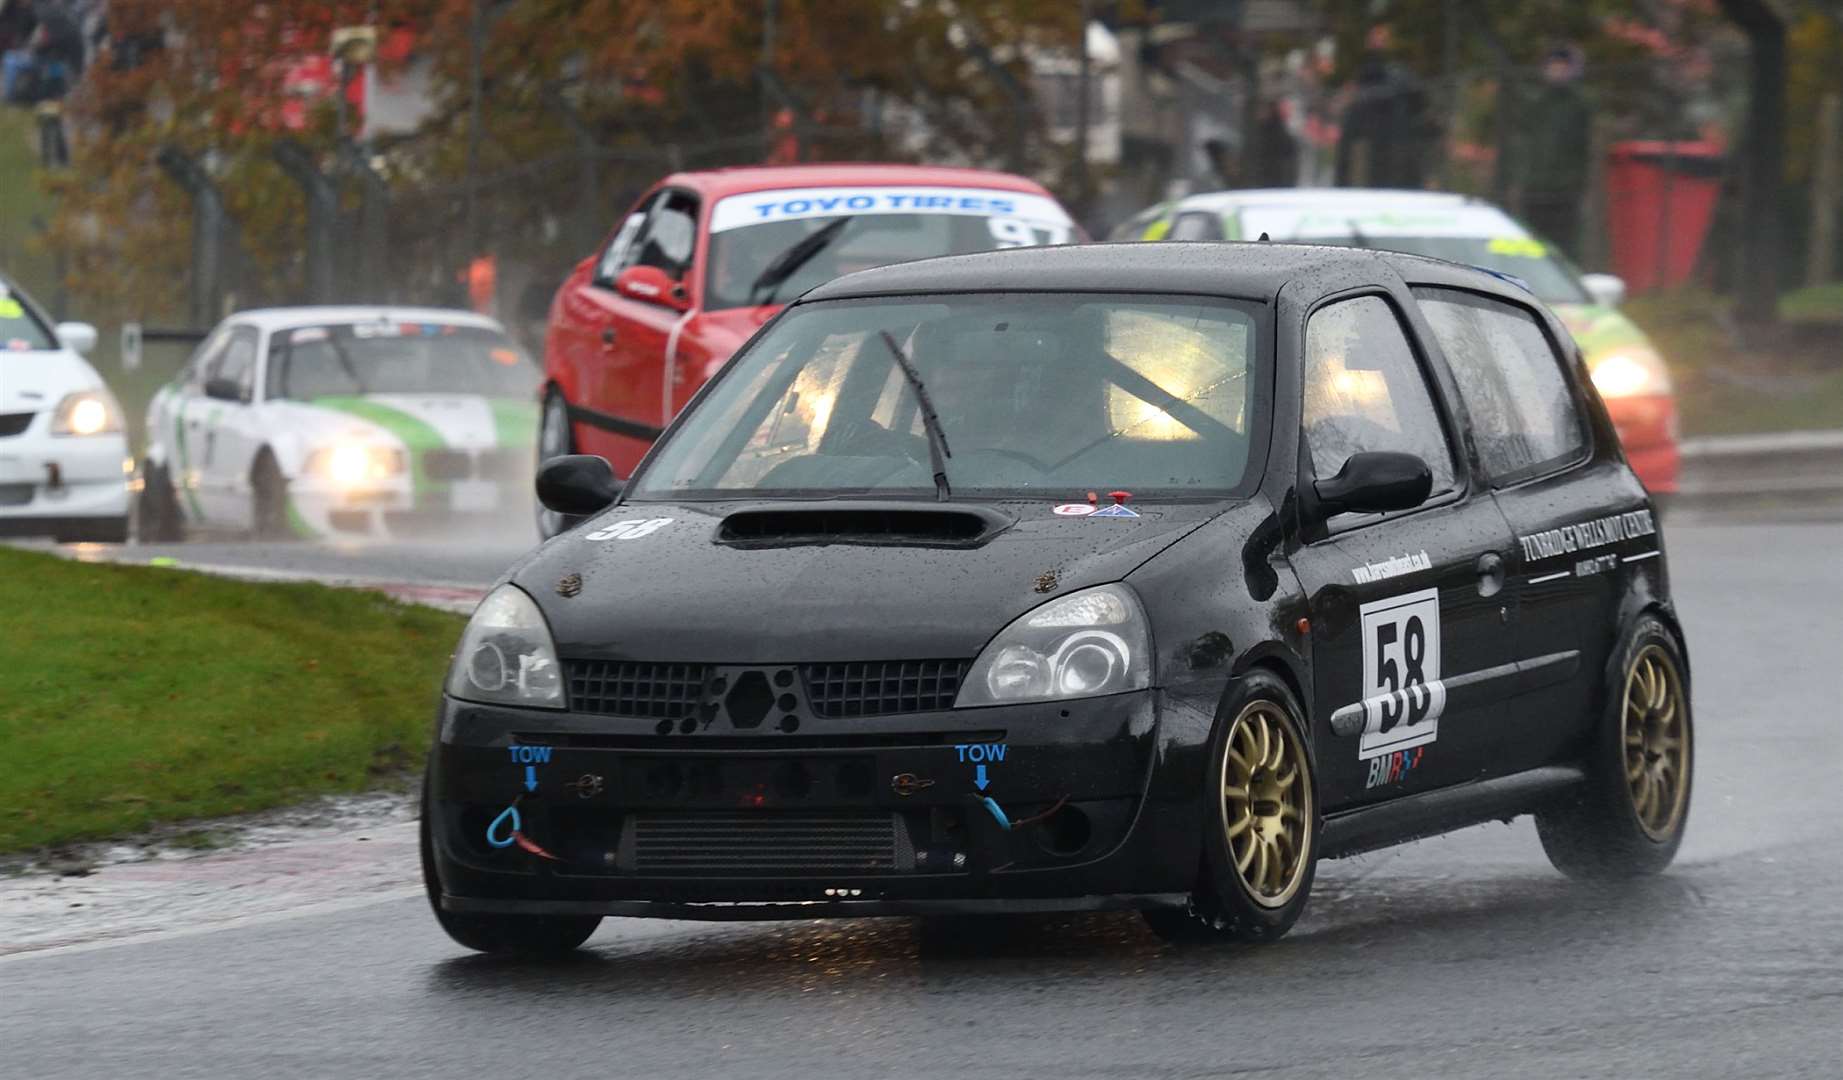 Nick Wall, from Sevenoaks, finished third and fourth overall and took two class wins in the Super Saloons races aboard his Renault Clio